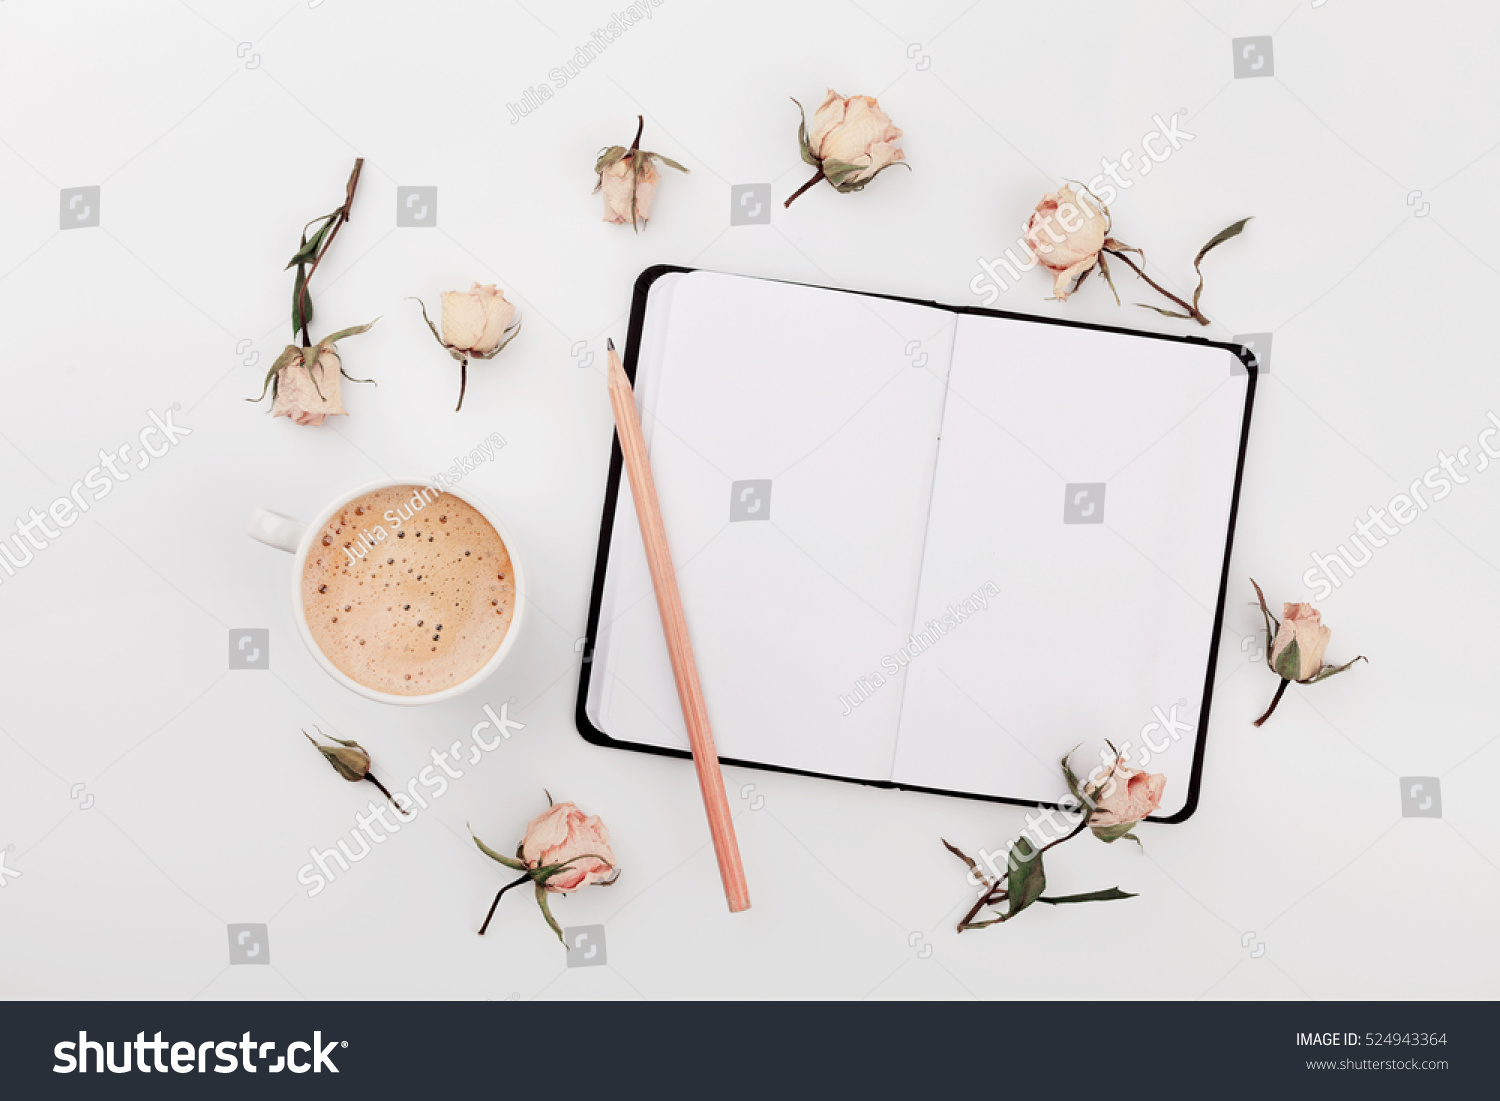 Morning Cup of coffee, empty notebook and dry roses flowers on white table from above. Cozy Breakfast. Flat lay style. #524943364